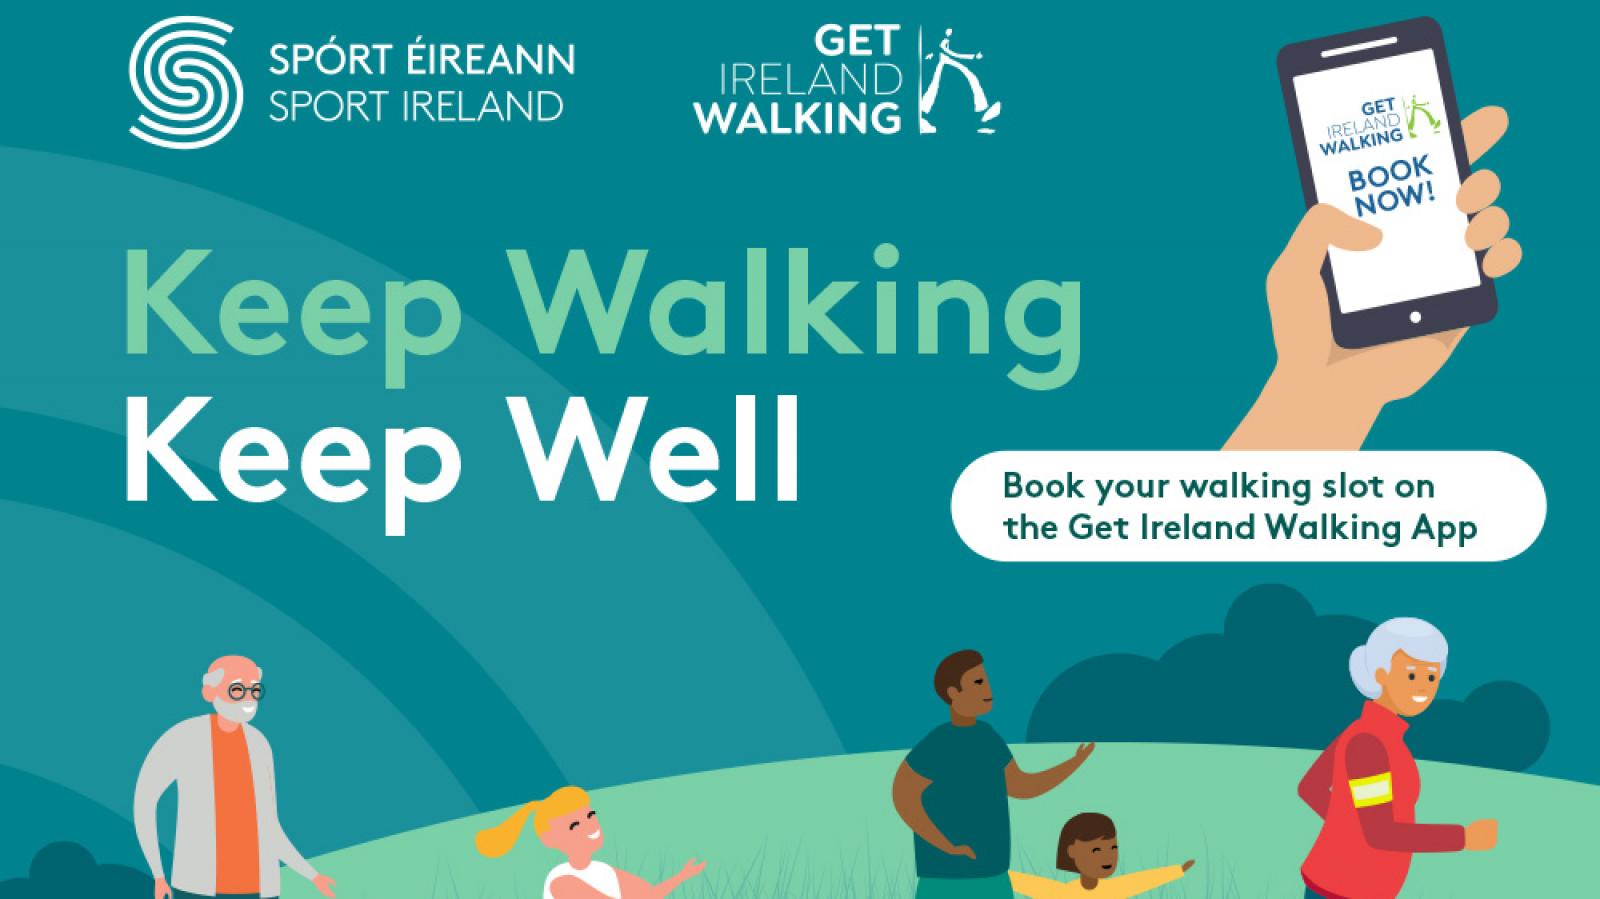 Informational poster for Keep Walking Keep Well campaign with illustrations of people of all ages and abilities walking and an image of the registration app with the text book now